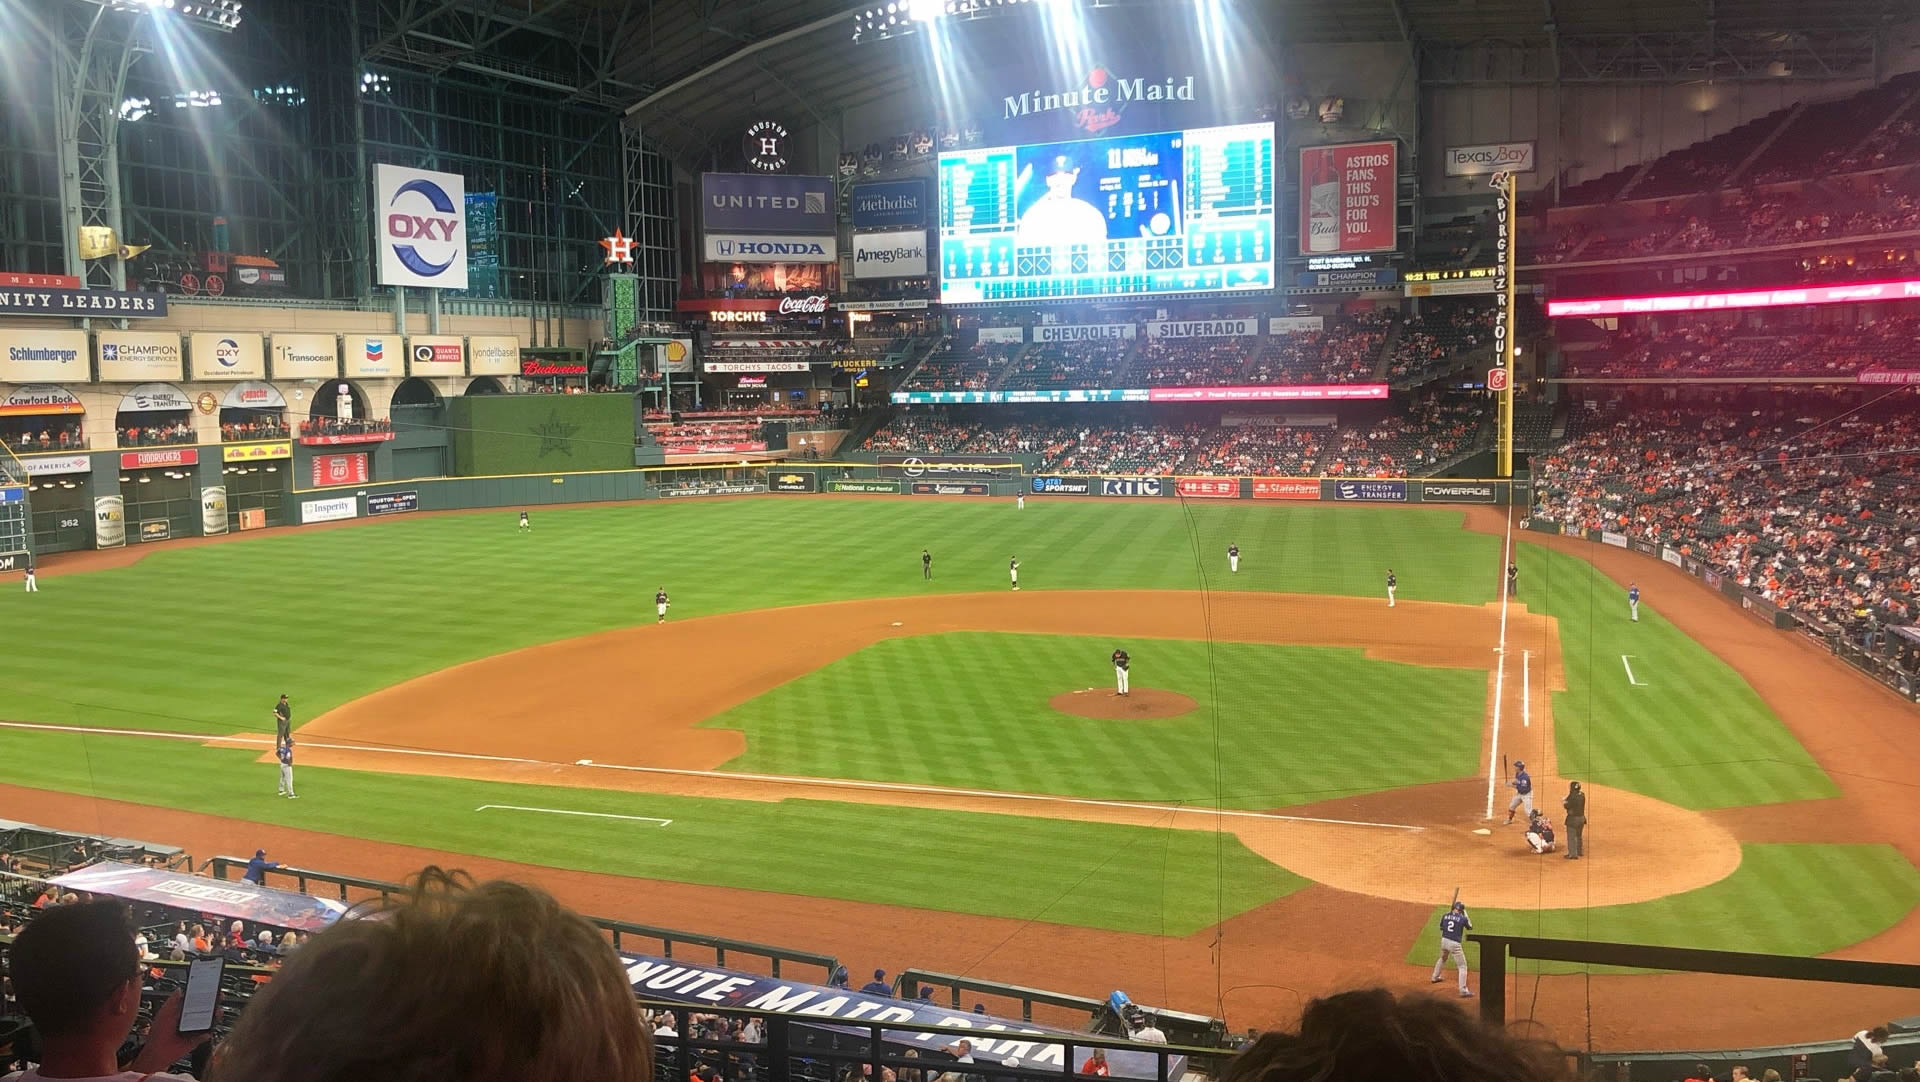 Section 216 at Minute Maid Park 